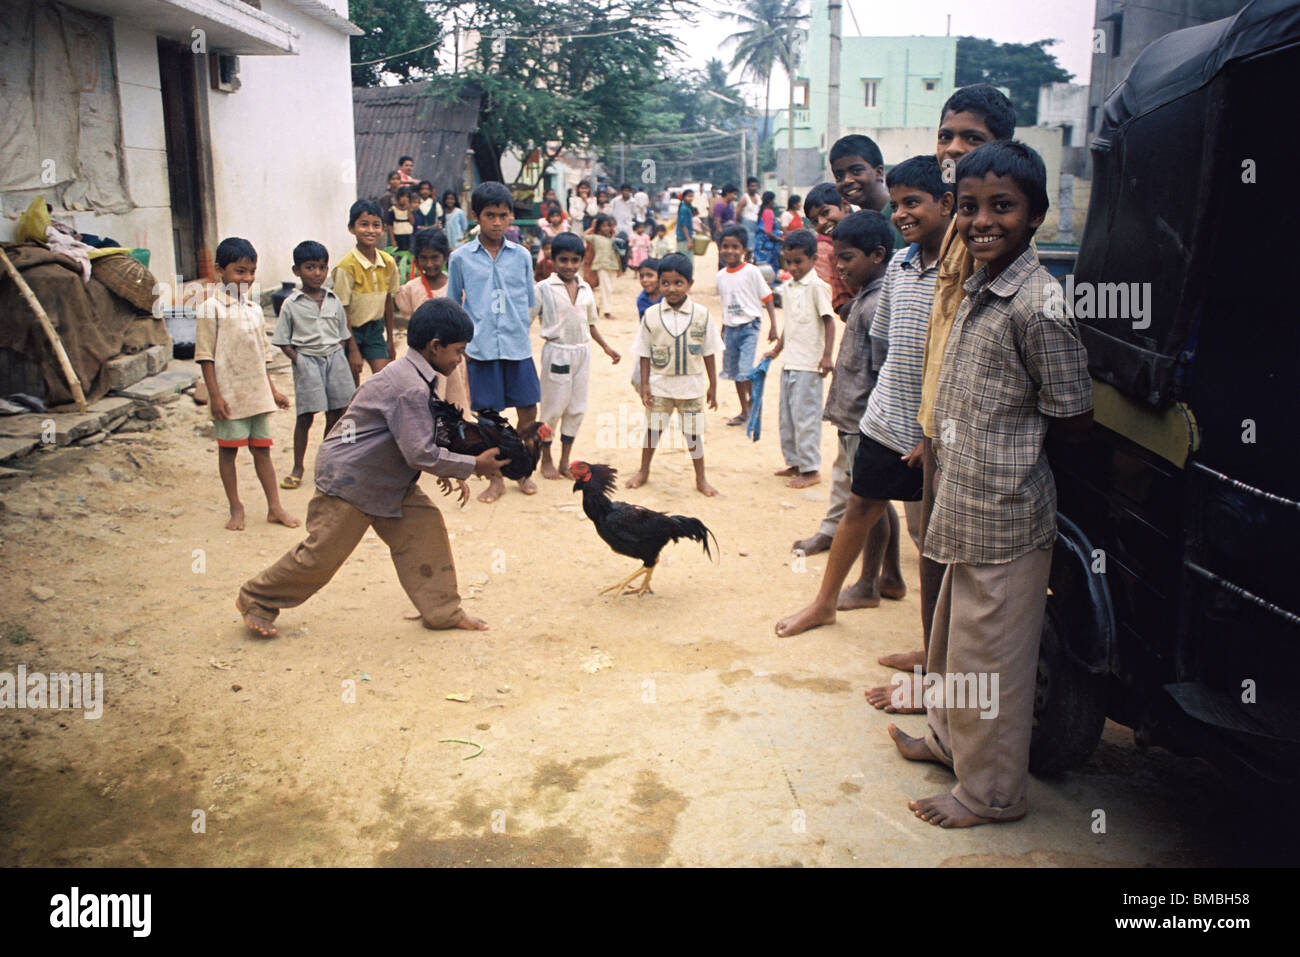 A group of children in Ragigudda slum, a shantytown in the southern part of Bangalore, trying to orchestrate a cockfight, in southern India. Stock Photo